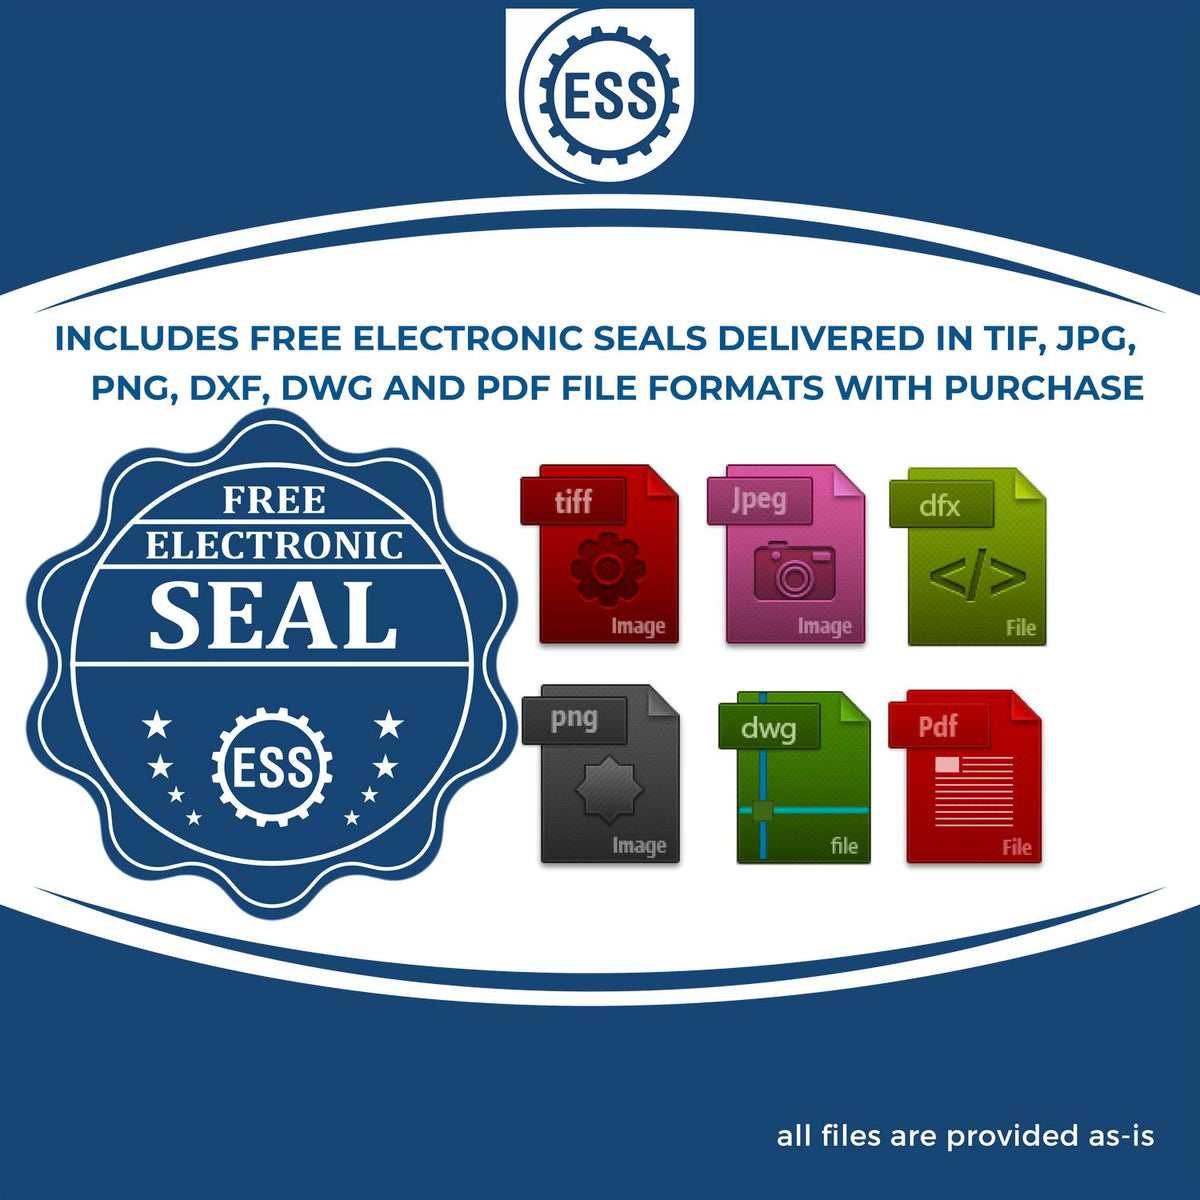 An infographic for the free electronic seal for the Self-Inking Missouri PE Stamp illustrating the different file type icons such as DXF, DWG, TIF, JPG and PNG.